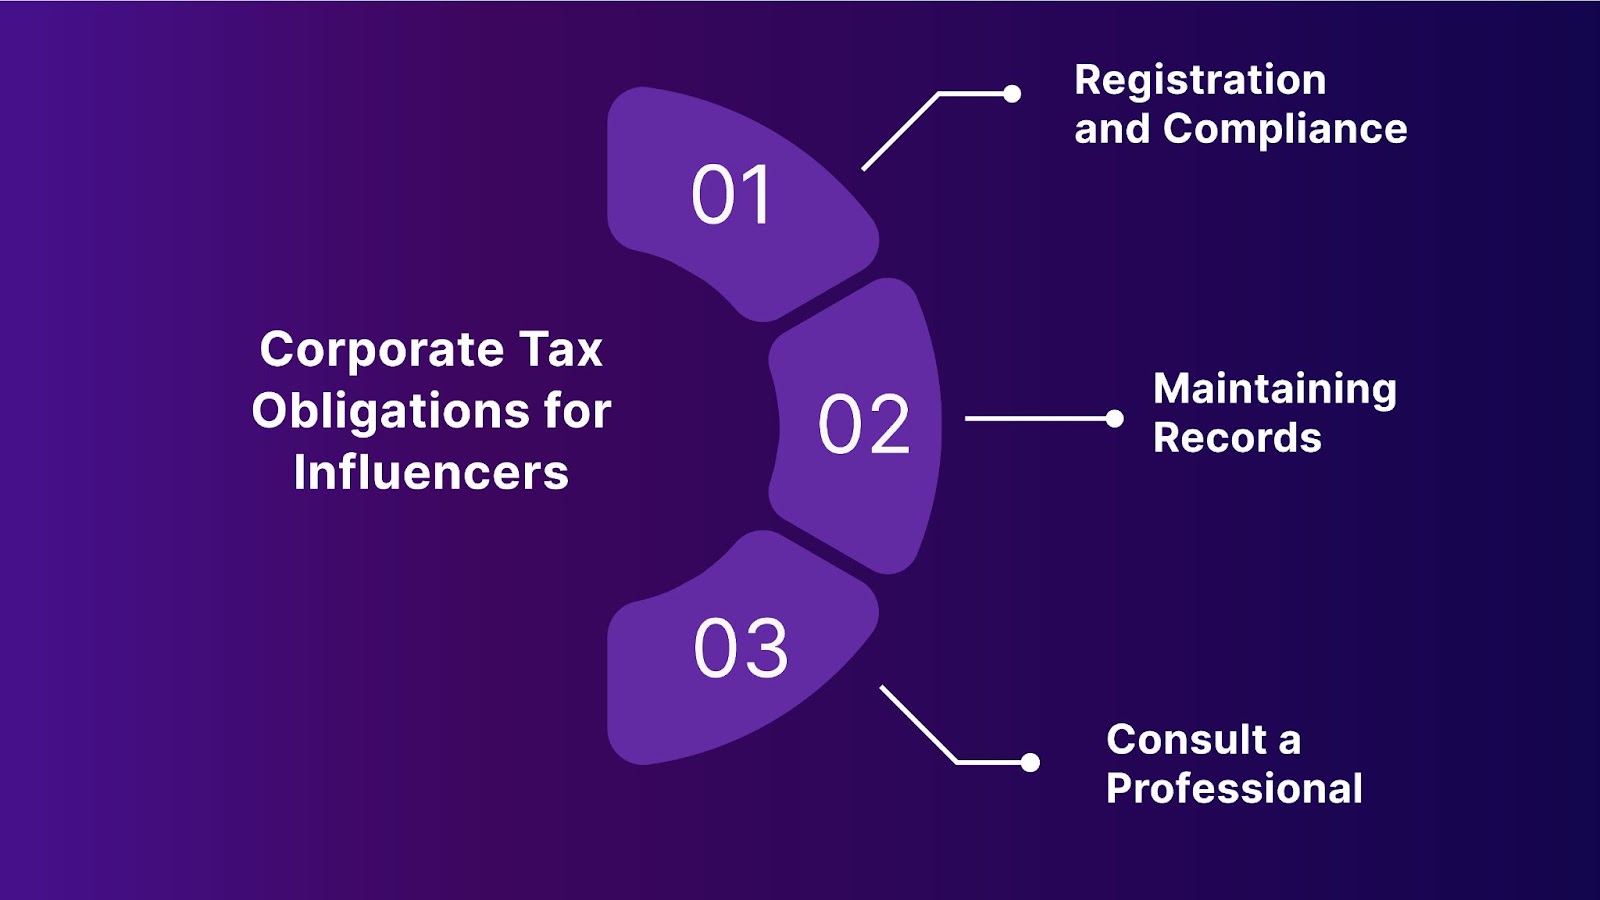 Corporate Tax Obligations for Influencers